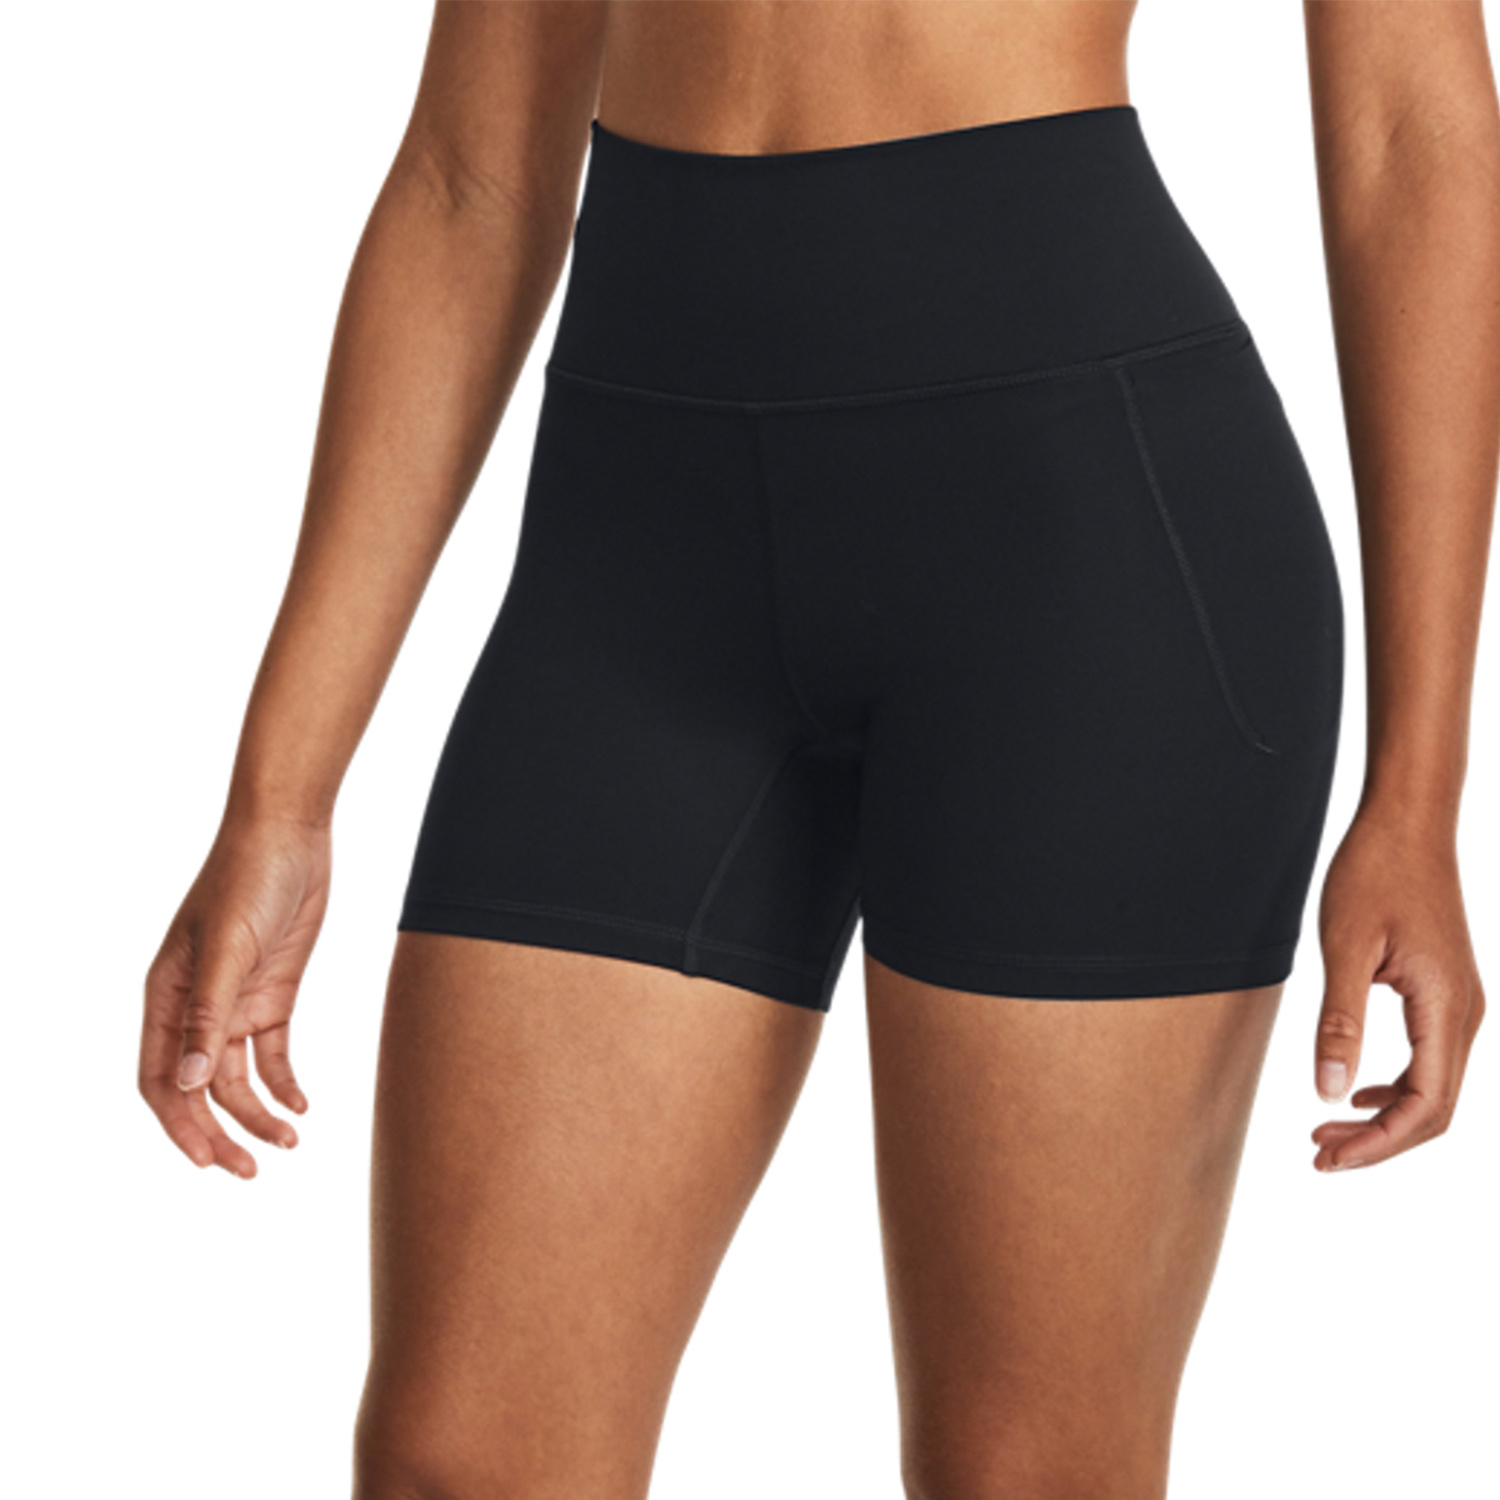 Under Armour Meridian 5in Shorts - Black